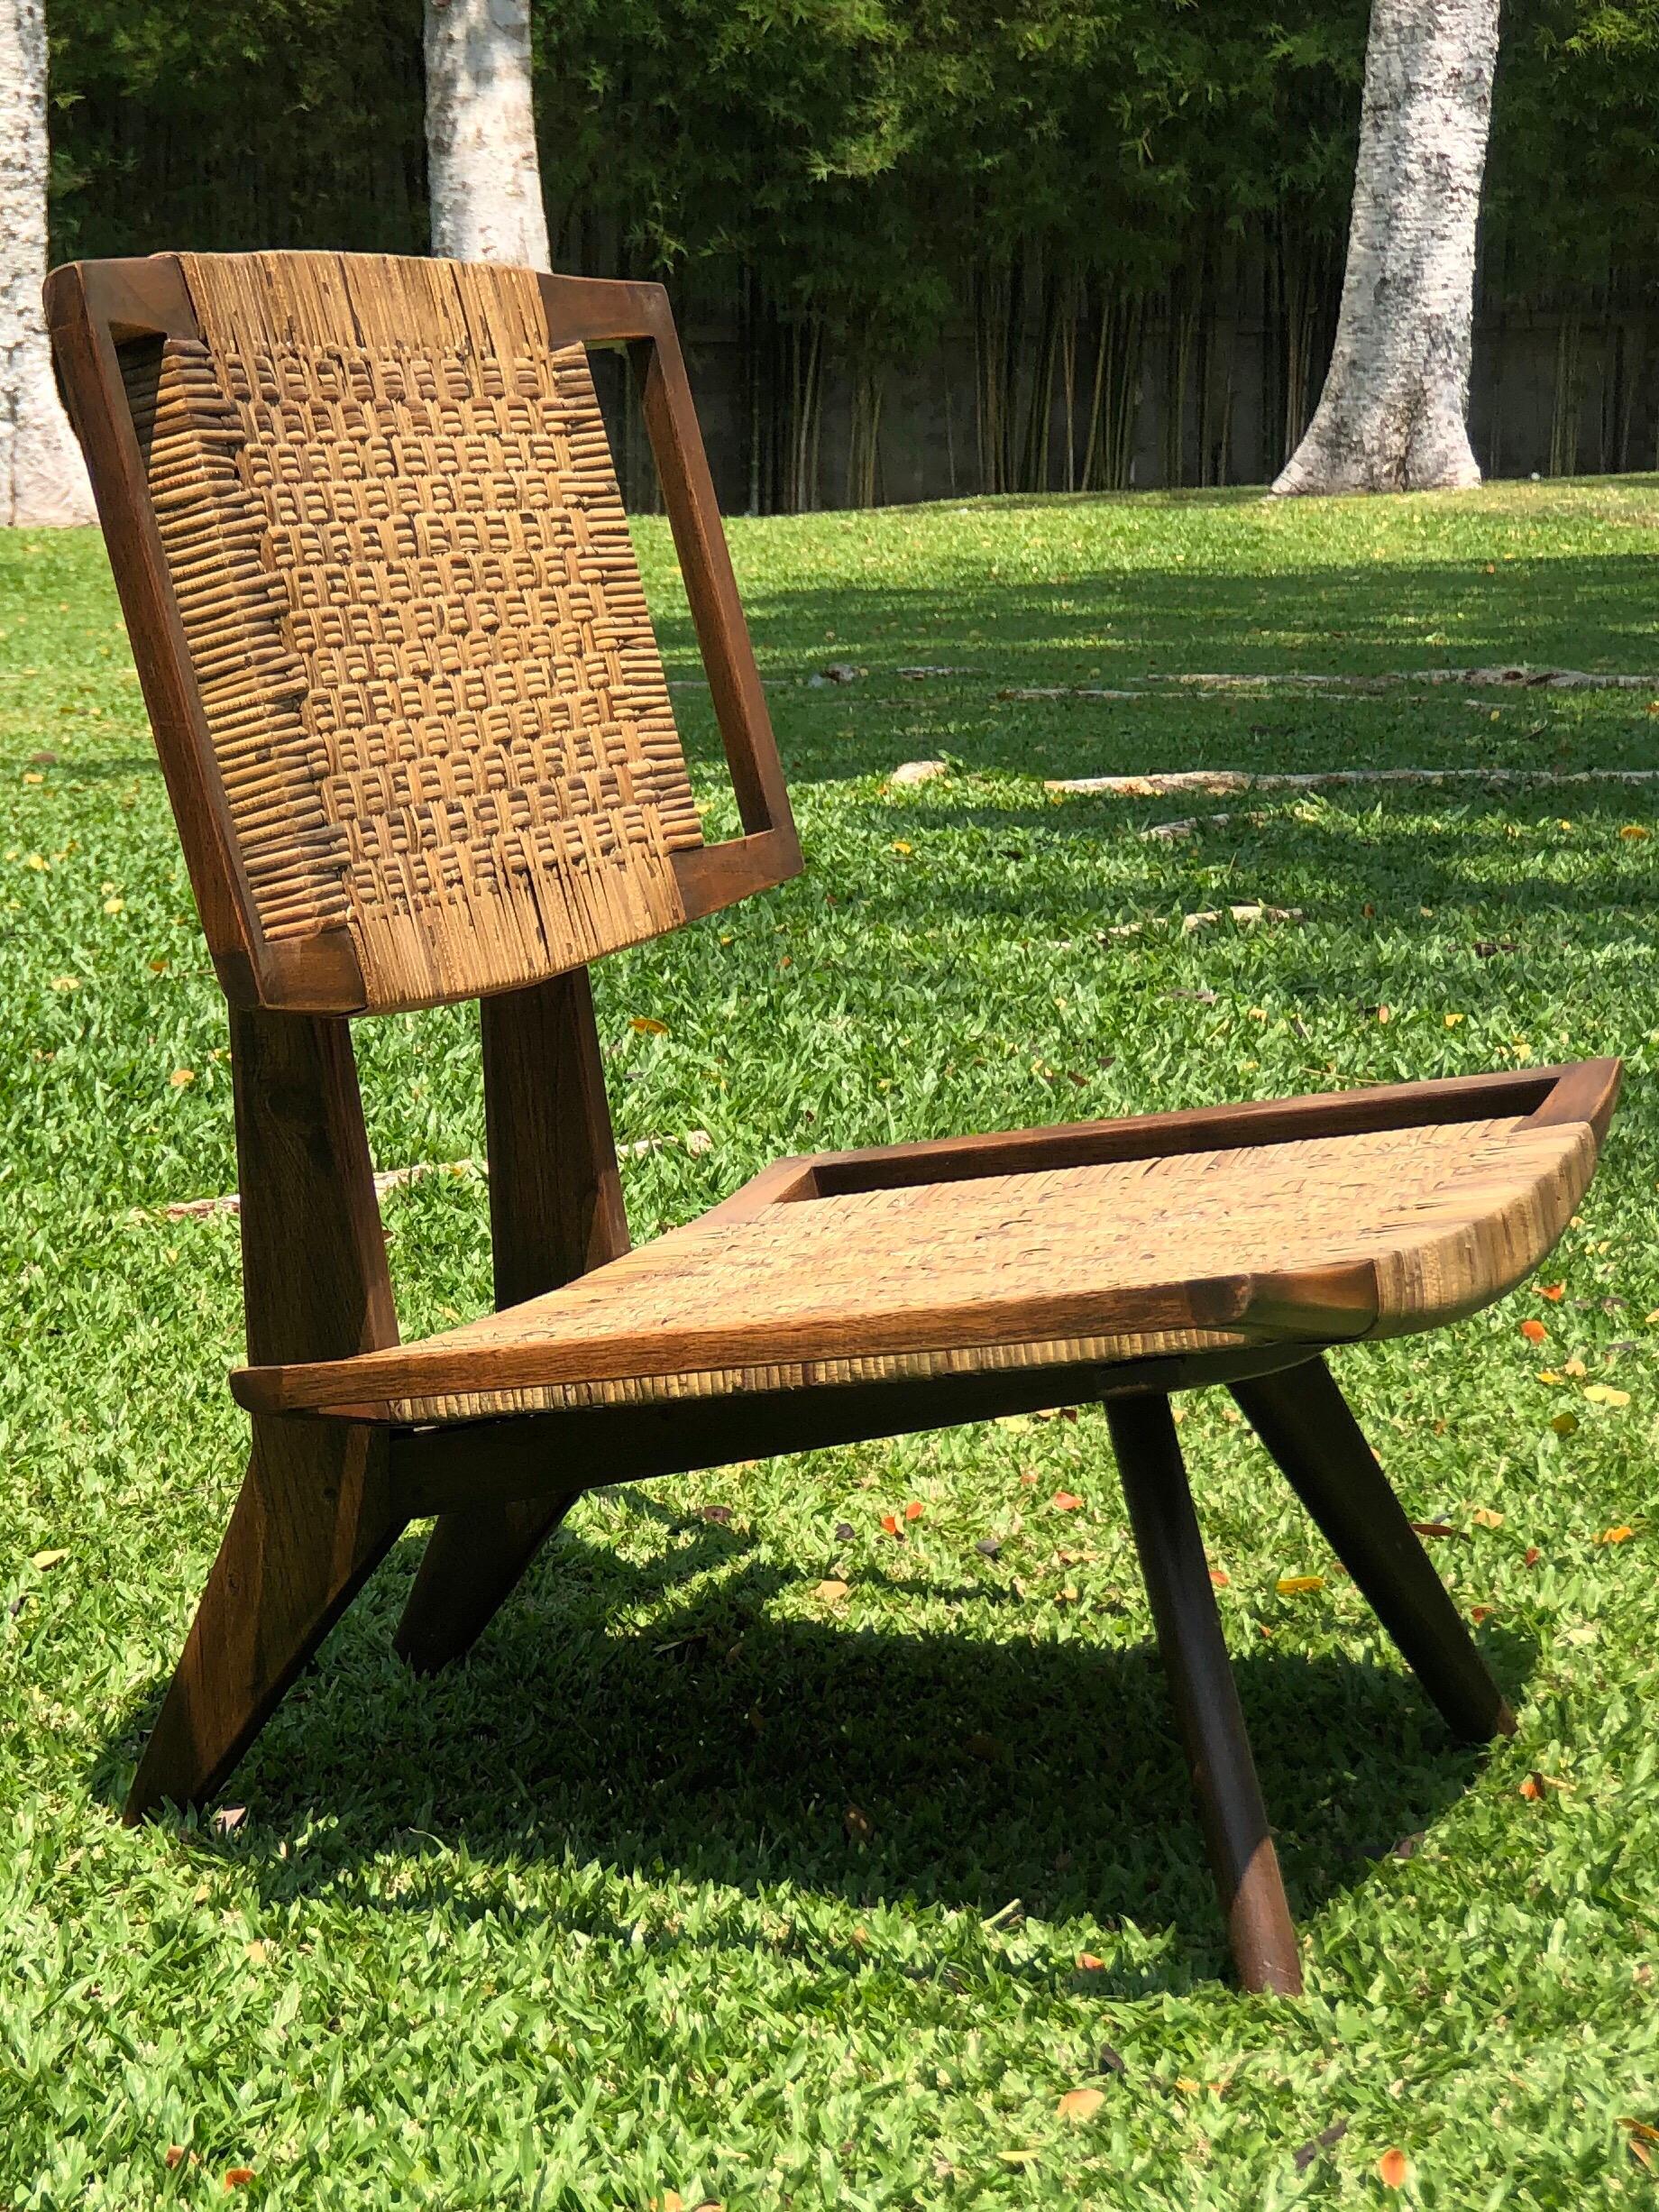 Burmese Pair of Colonial Art Deco Teak Chairs with Rattan from Burma or Myanmar, 1940 For Sale